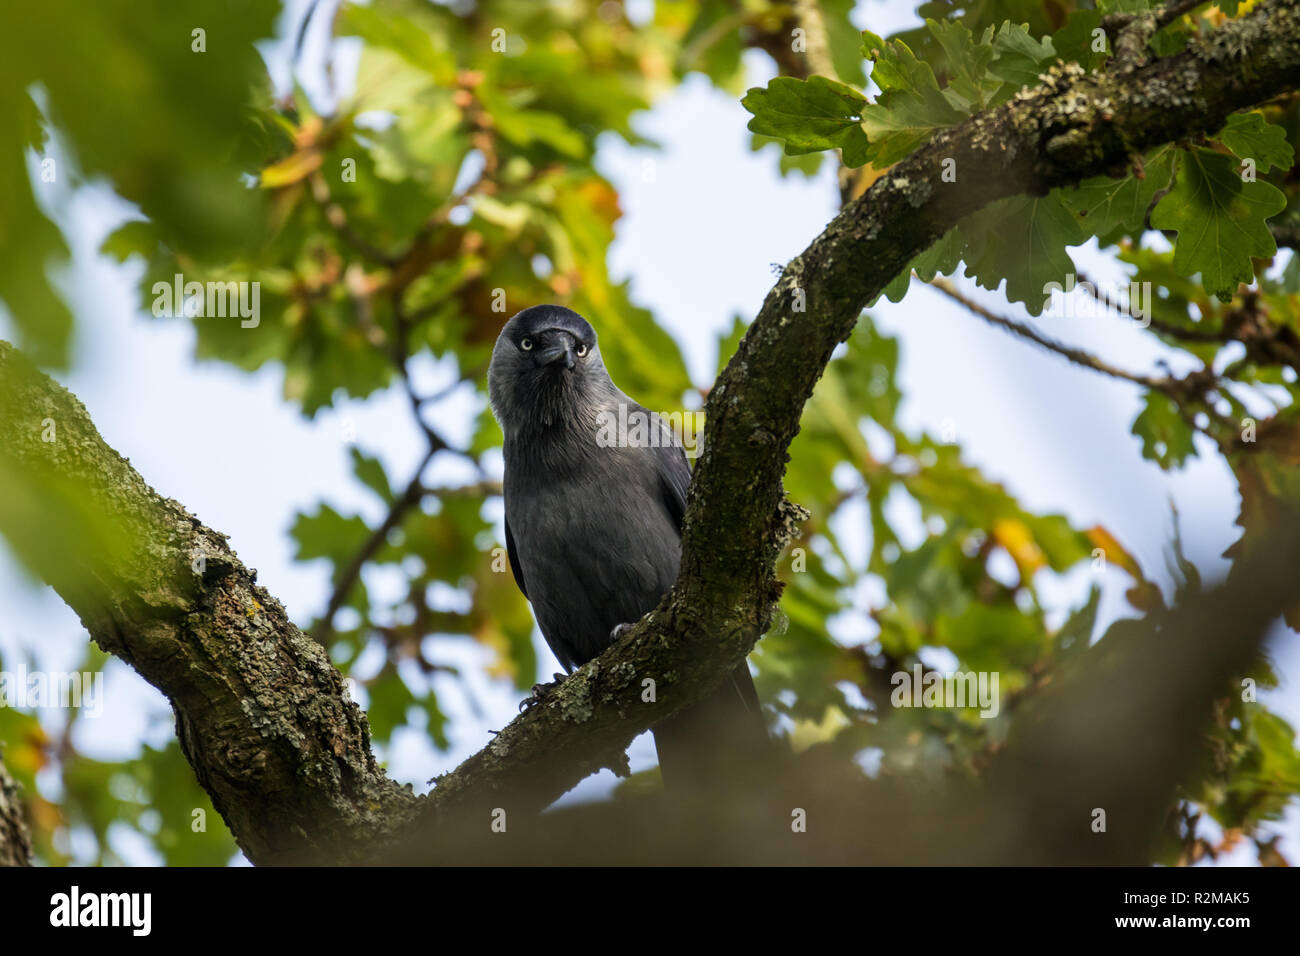 Jackdaw (Corvus monedula) perched on a branch surrounded by green foliage. Stock Photo